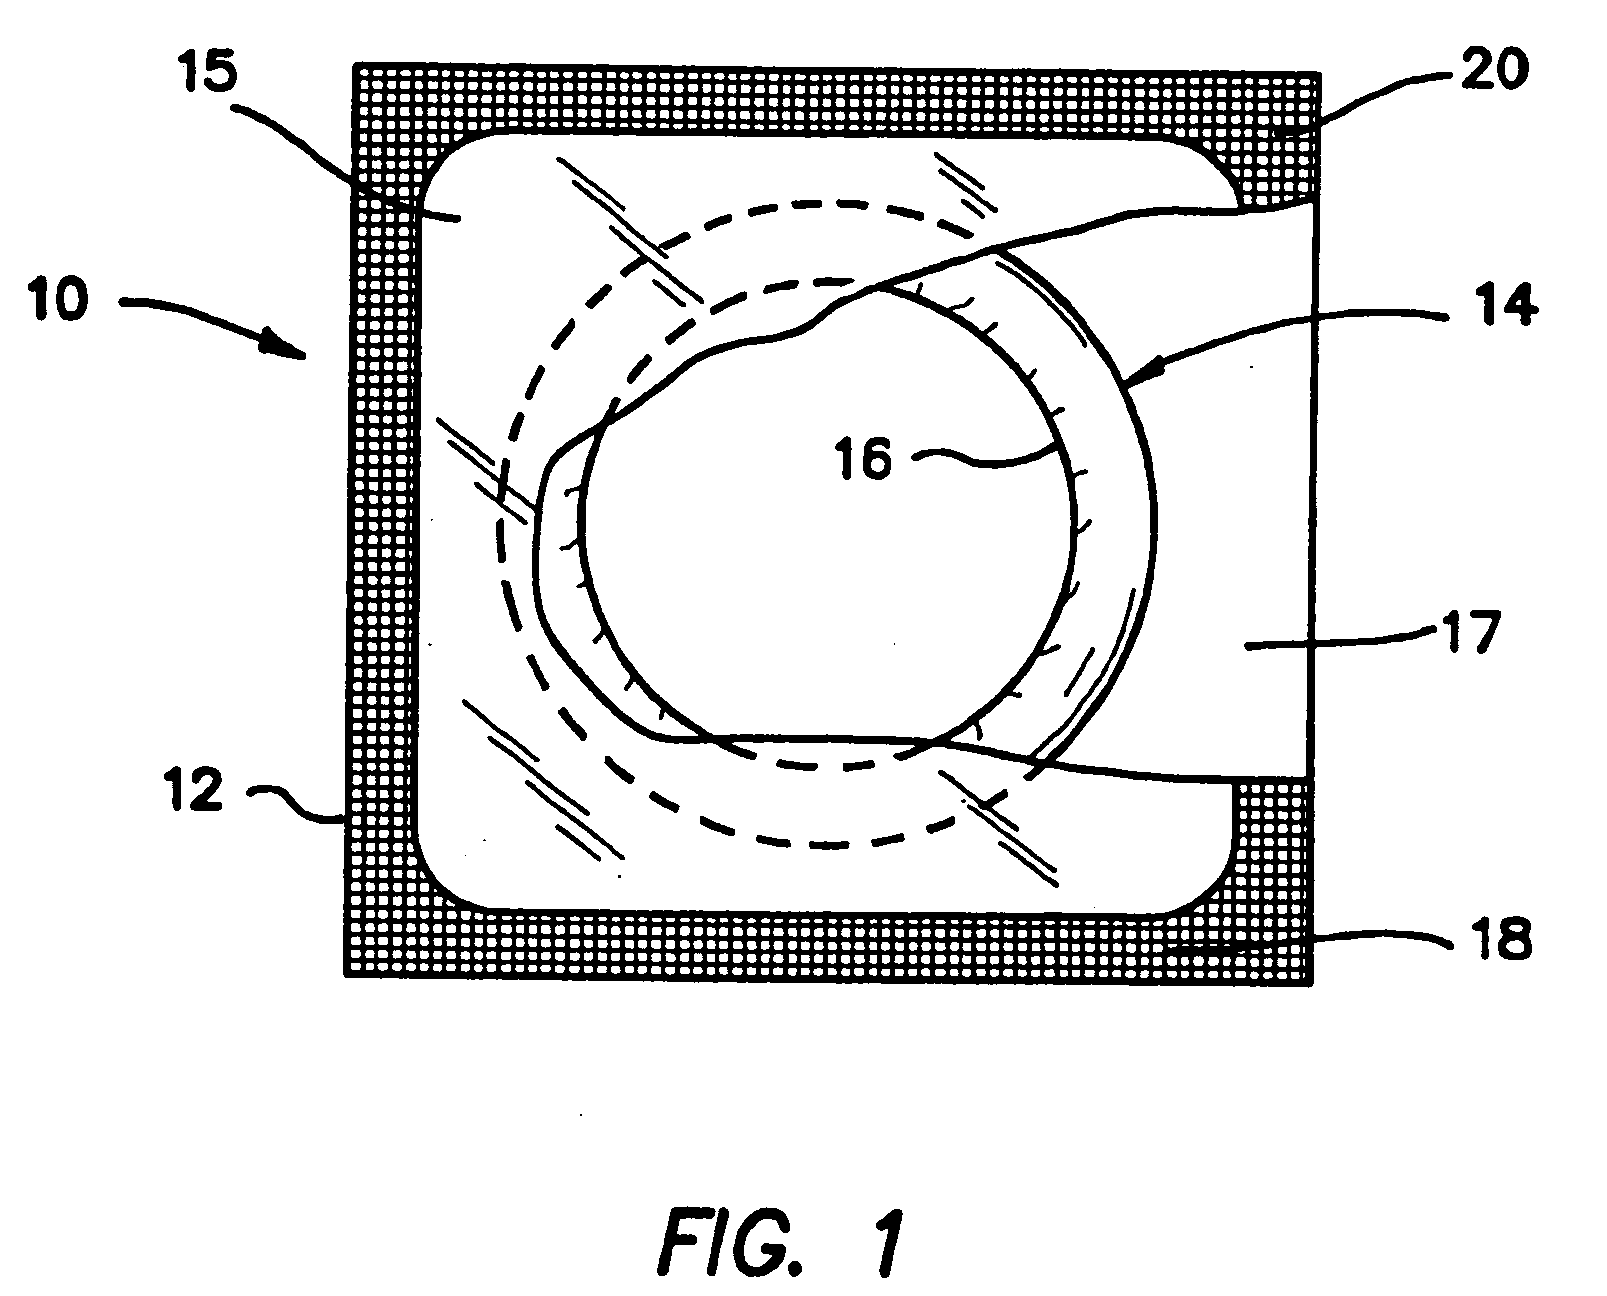 Clear, washable lubricant compositions, and methods of making same